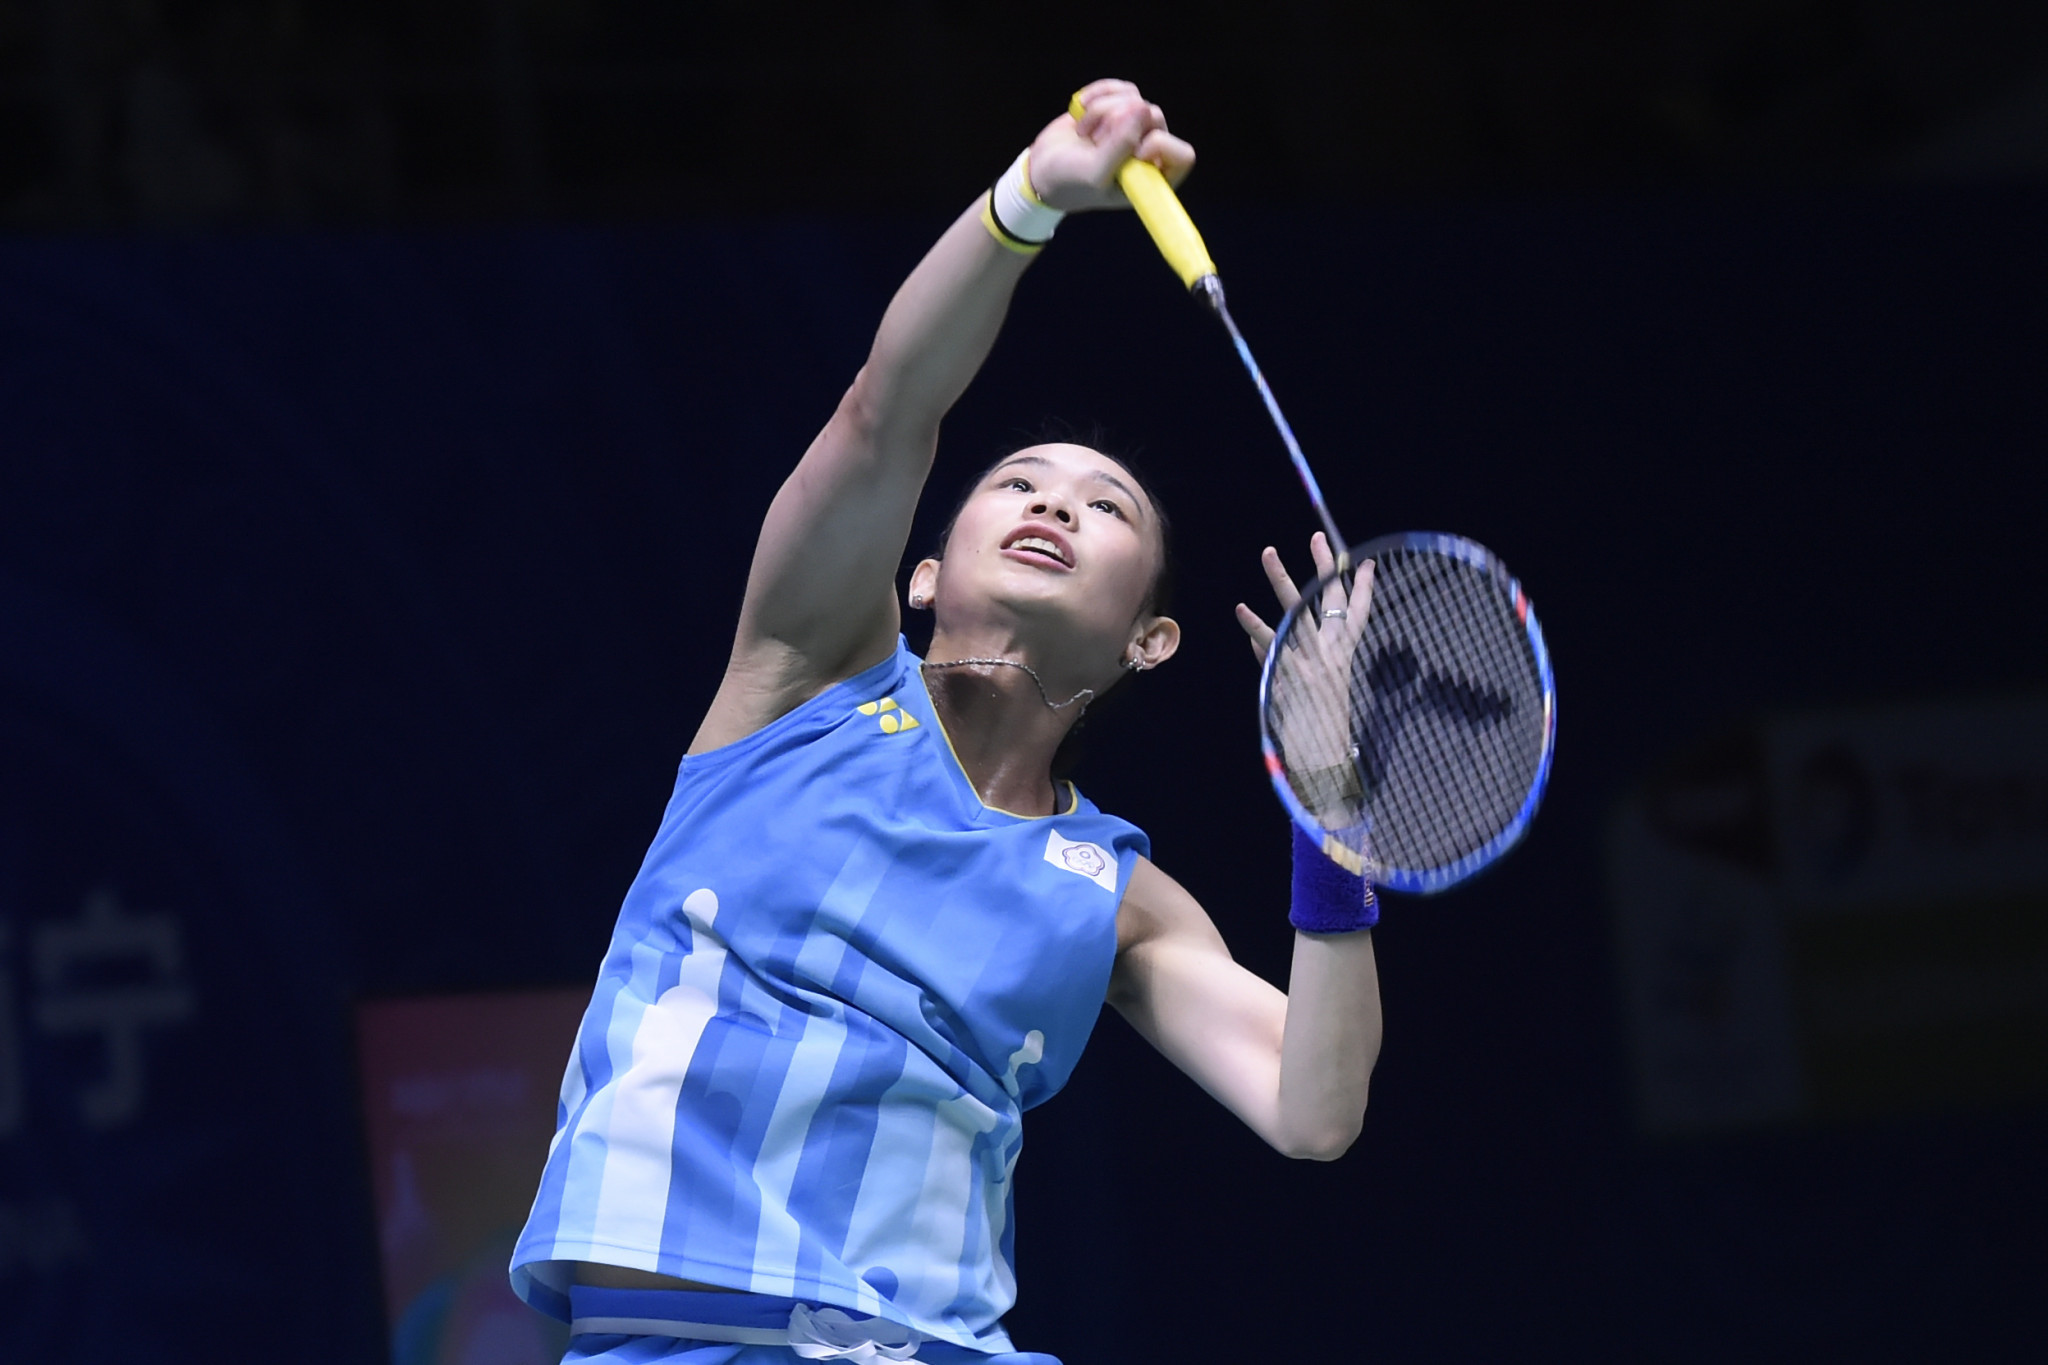 Tai Tzu-ying also began her women's title defence with round one victory ©Getty Images